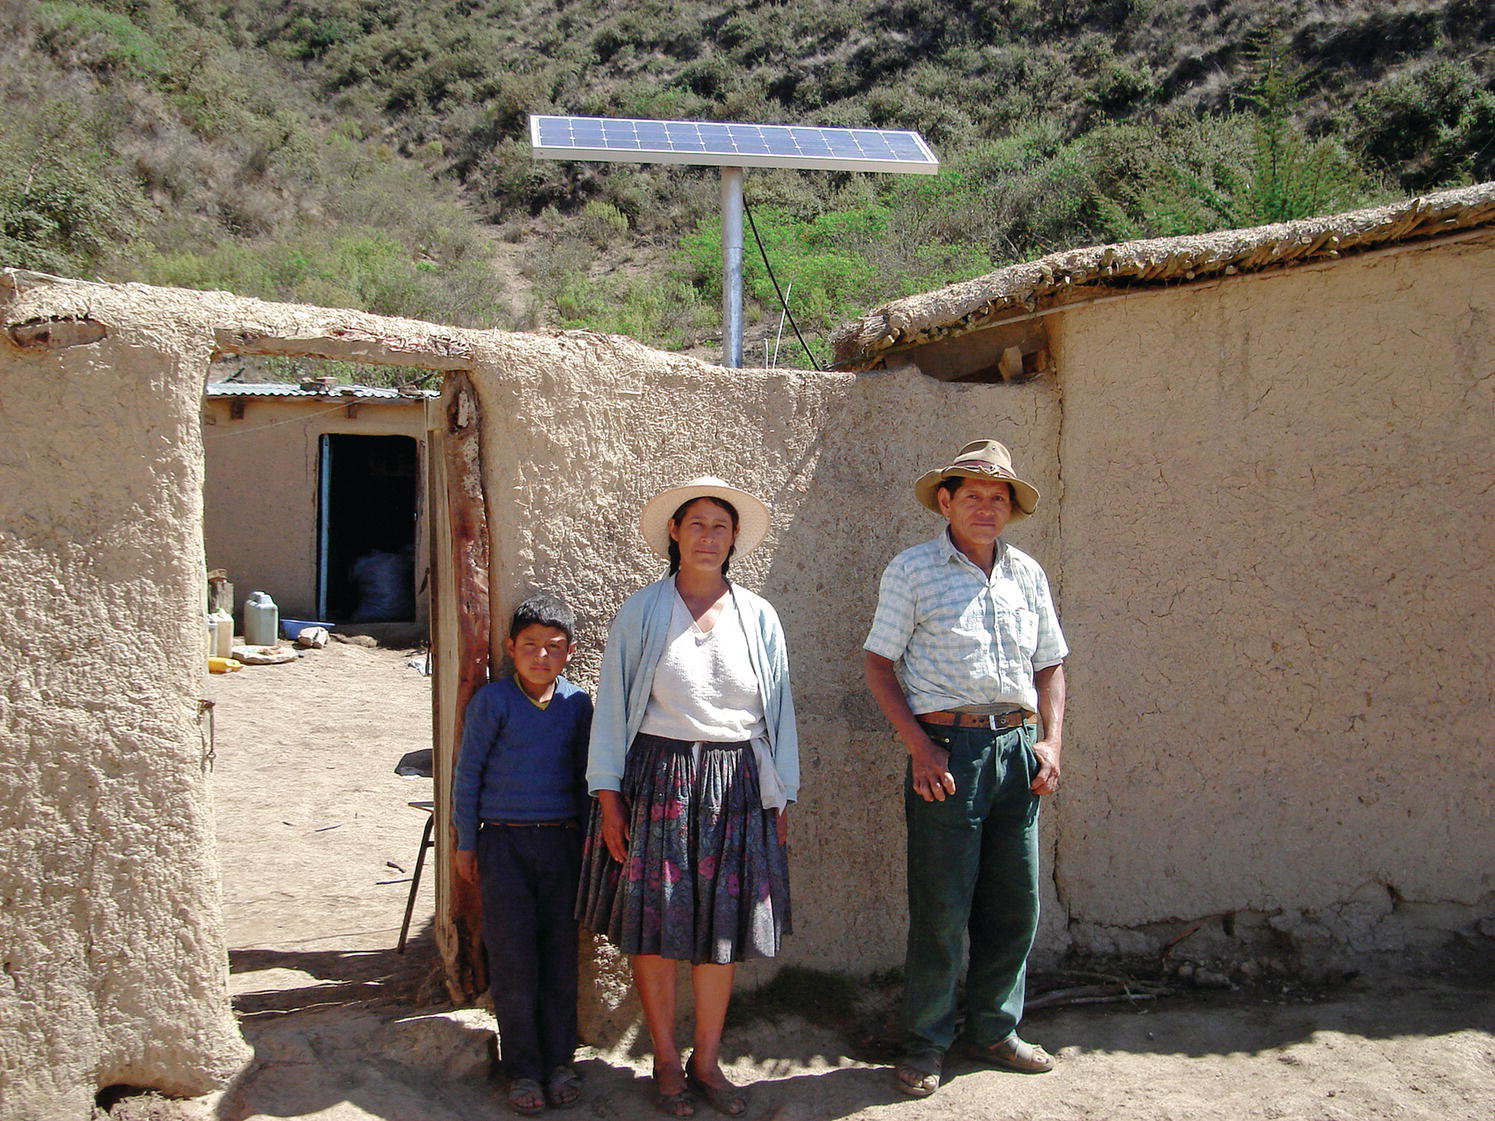 A man and a woman with a child standing displaying a PV module power at the background used as a solar home system in Bolivia.